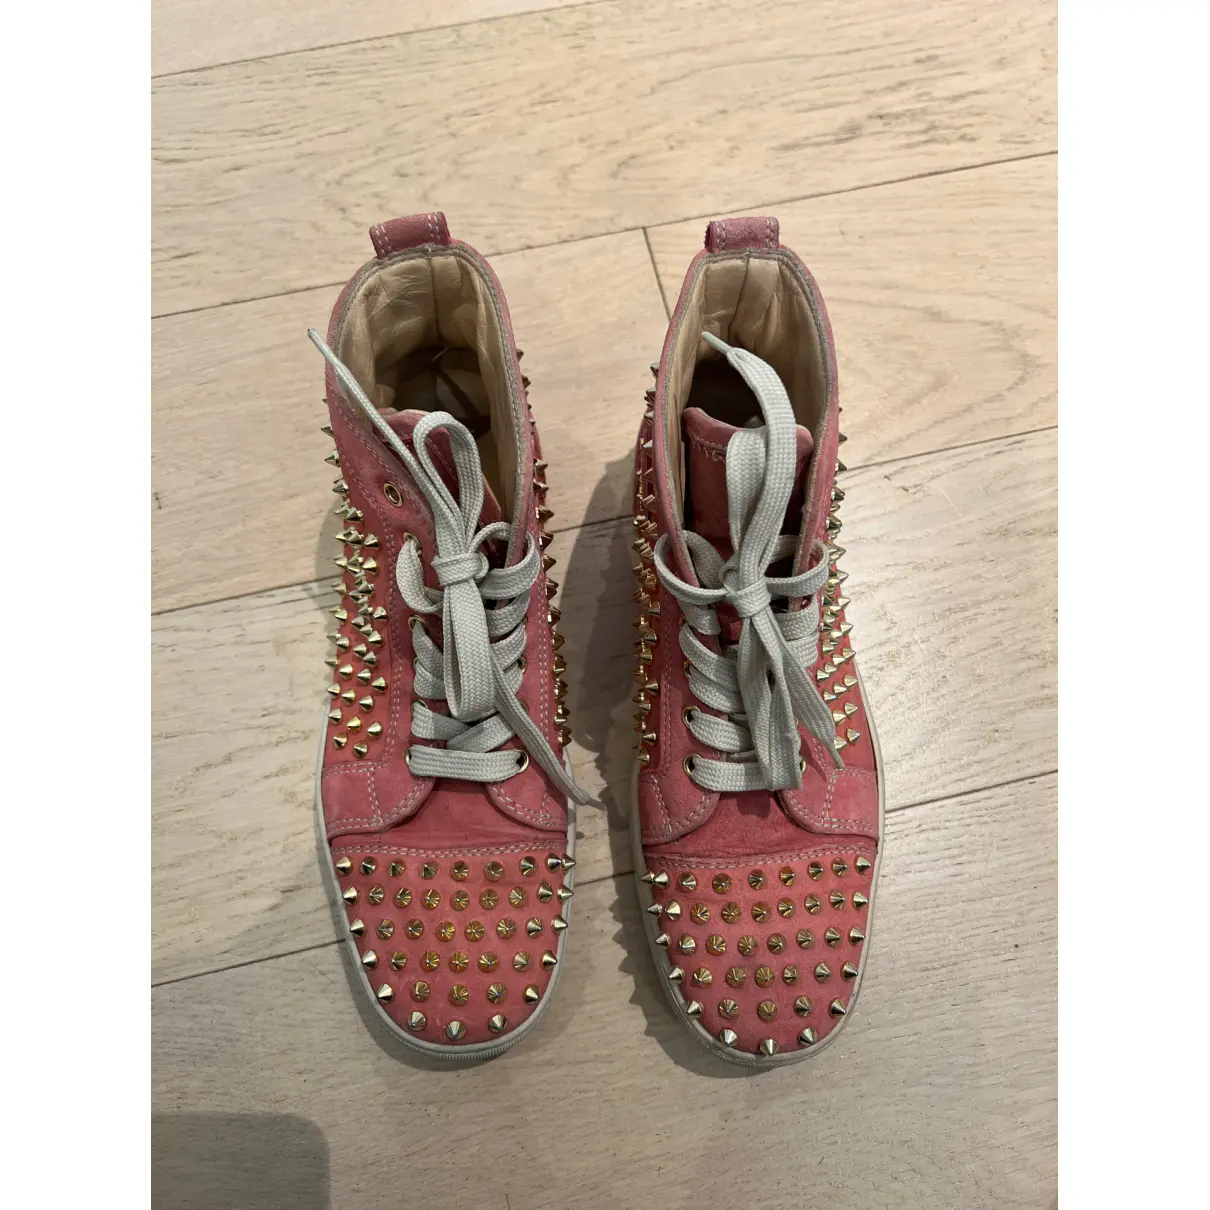 Buy Christian Louboutin Lou Spikes trainers online